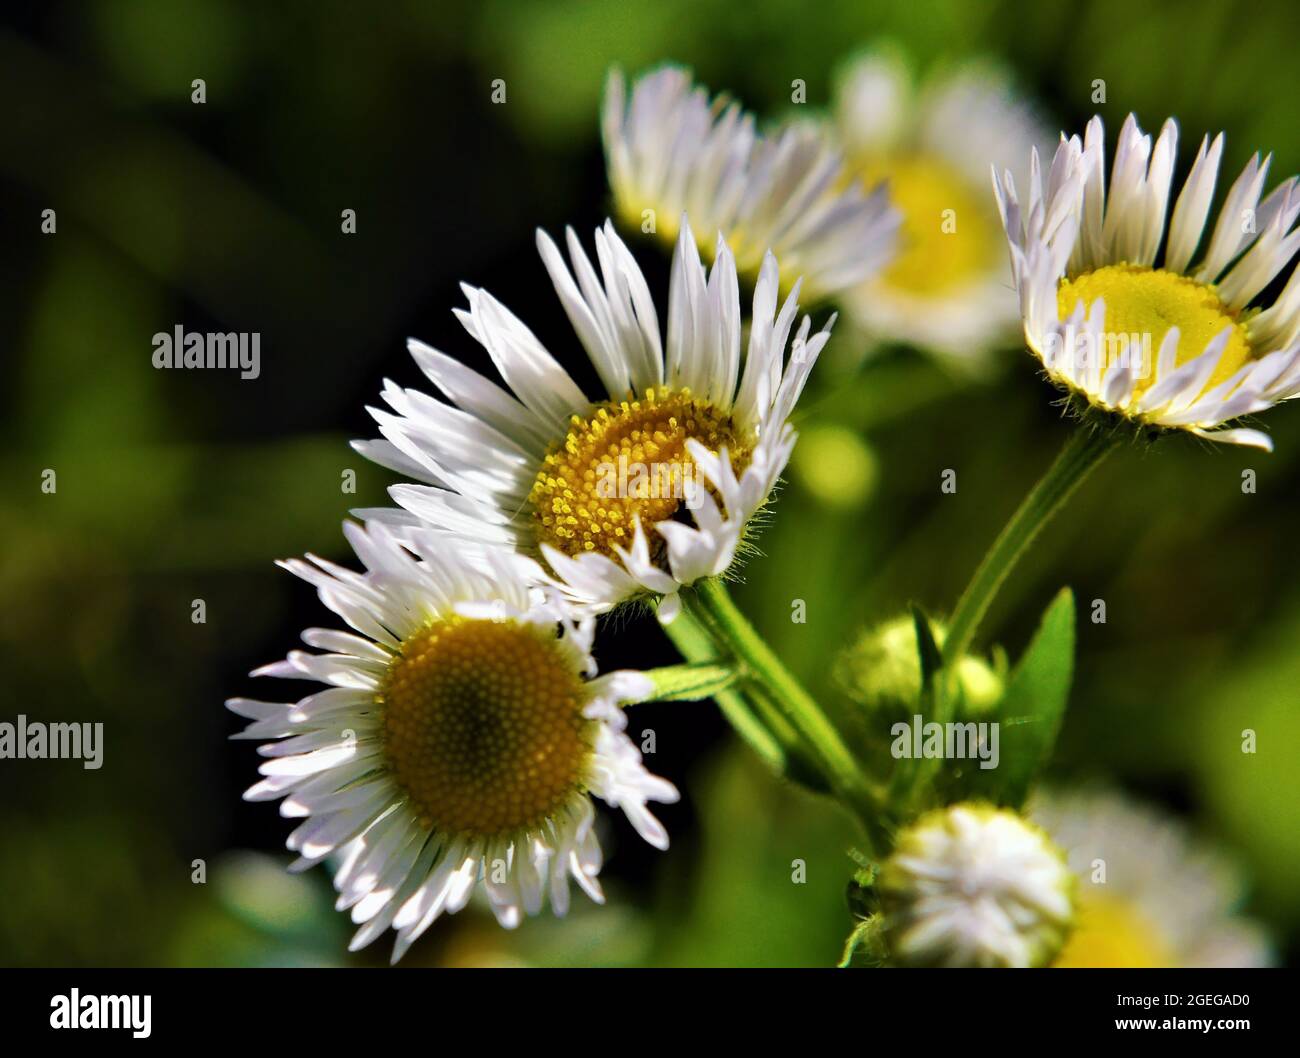 Close-up of the white flowers on a daisy fleabane plant growing in a meadow. Stock Photo